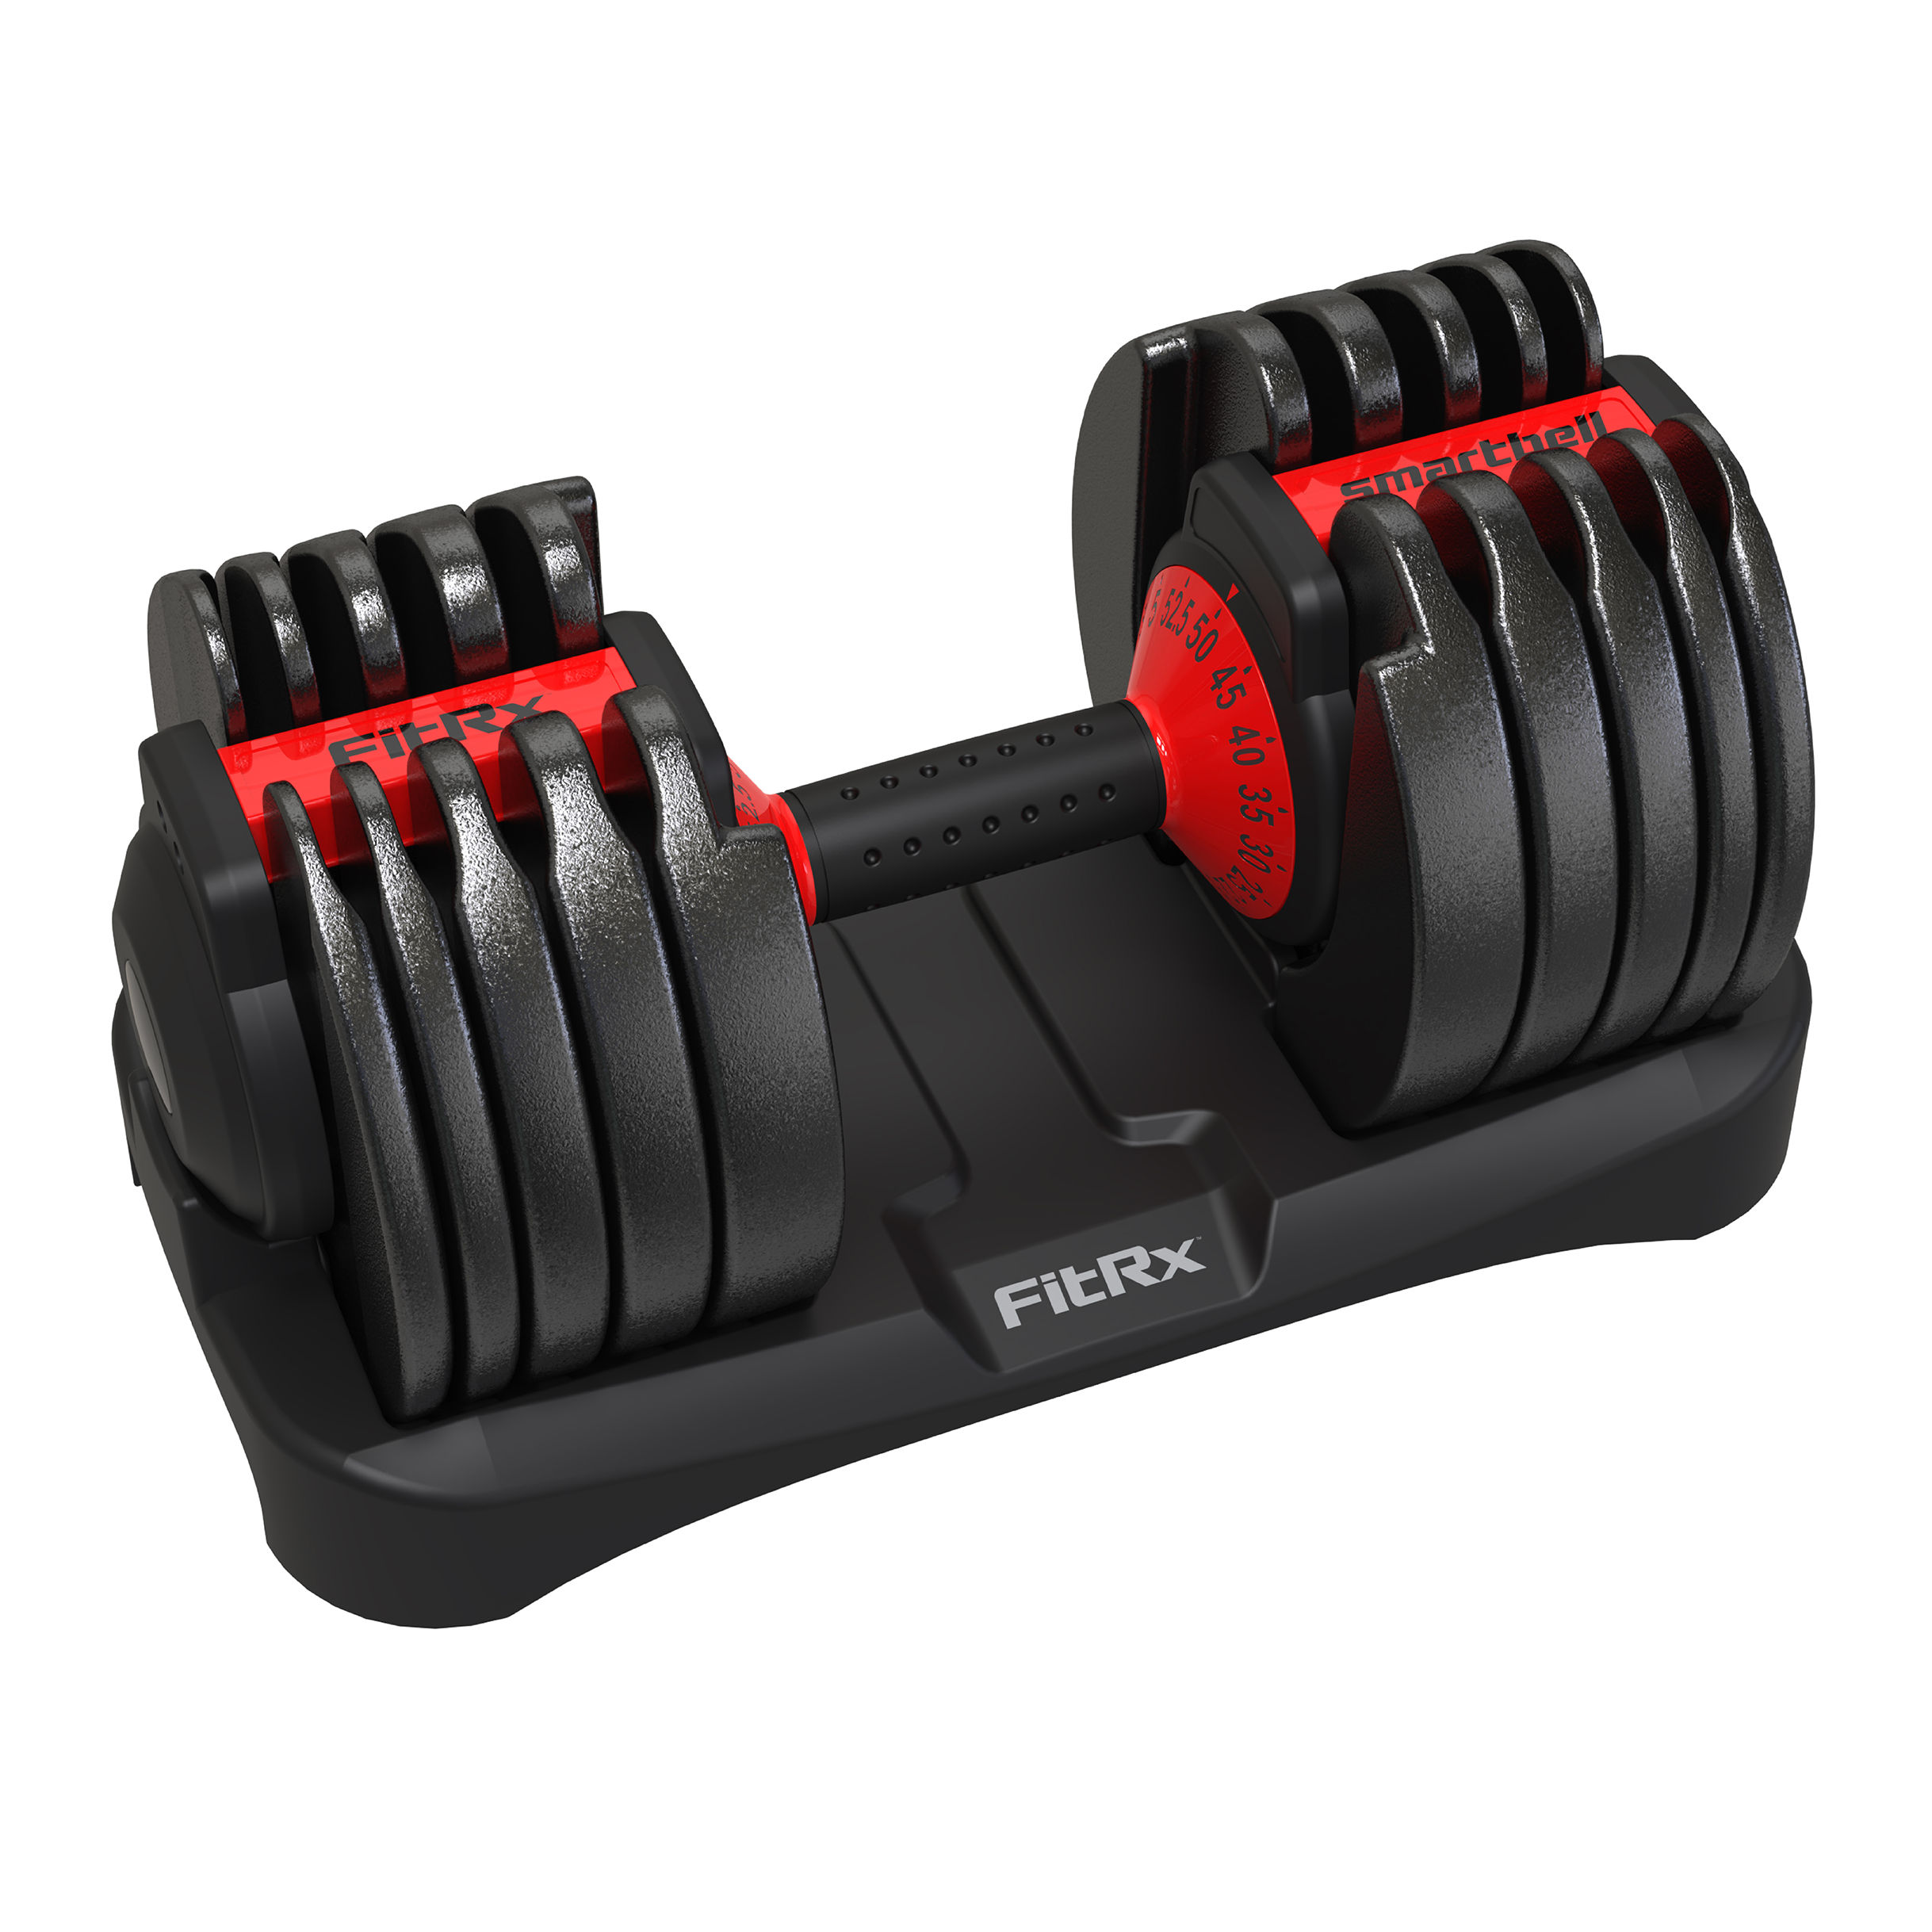 FitRx SmartBell, Quick-Select Adjustable Dumbbell, 5-52.5 lbs. Weight, Black, Single - image 1 of 12